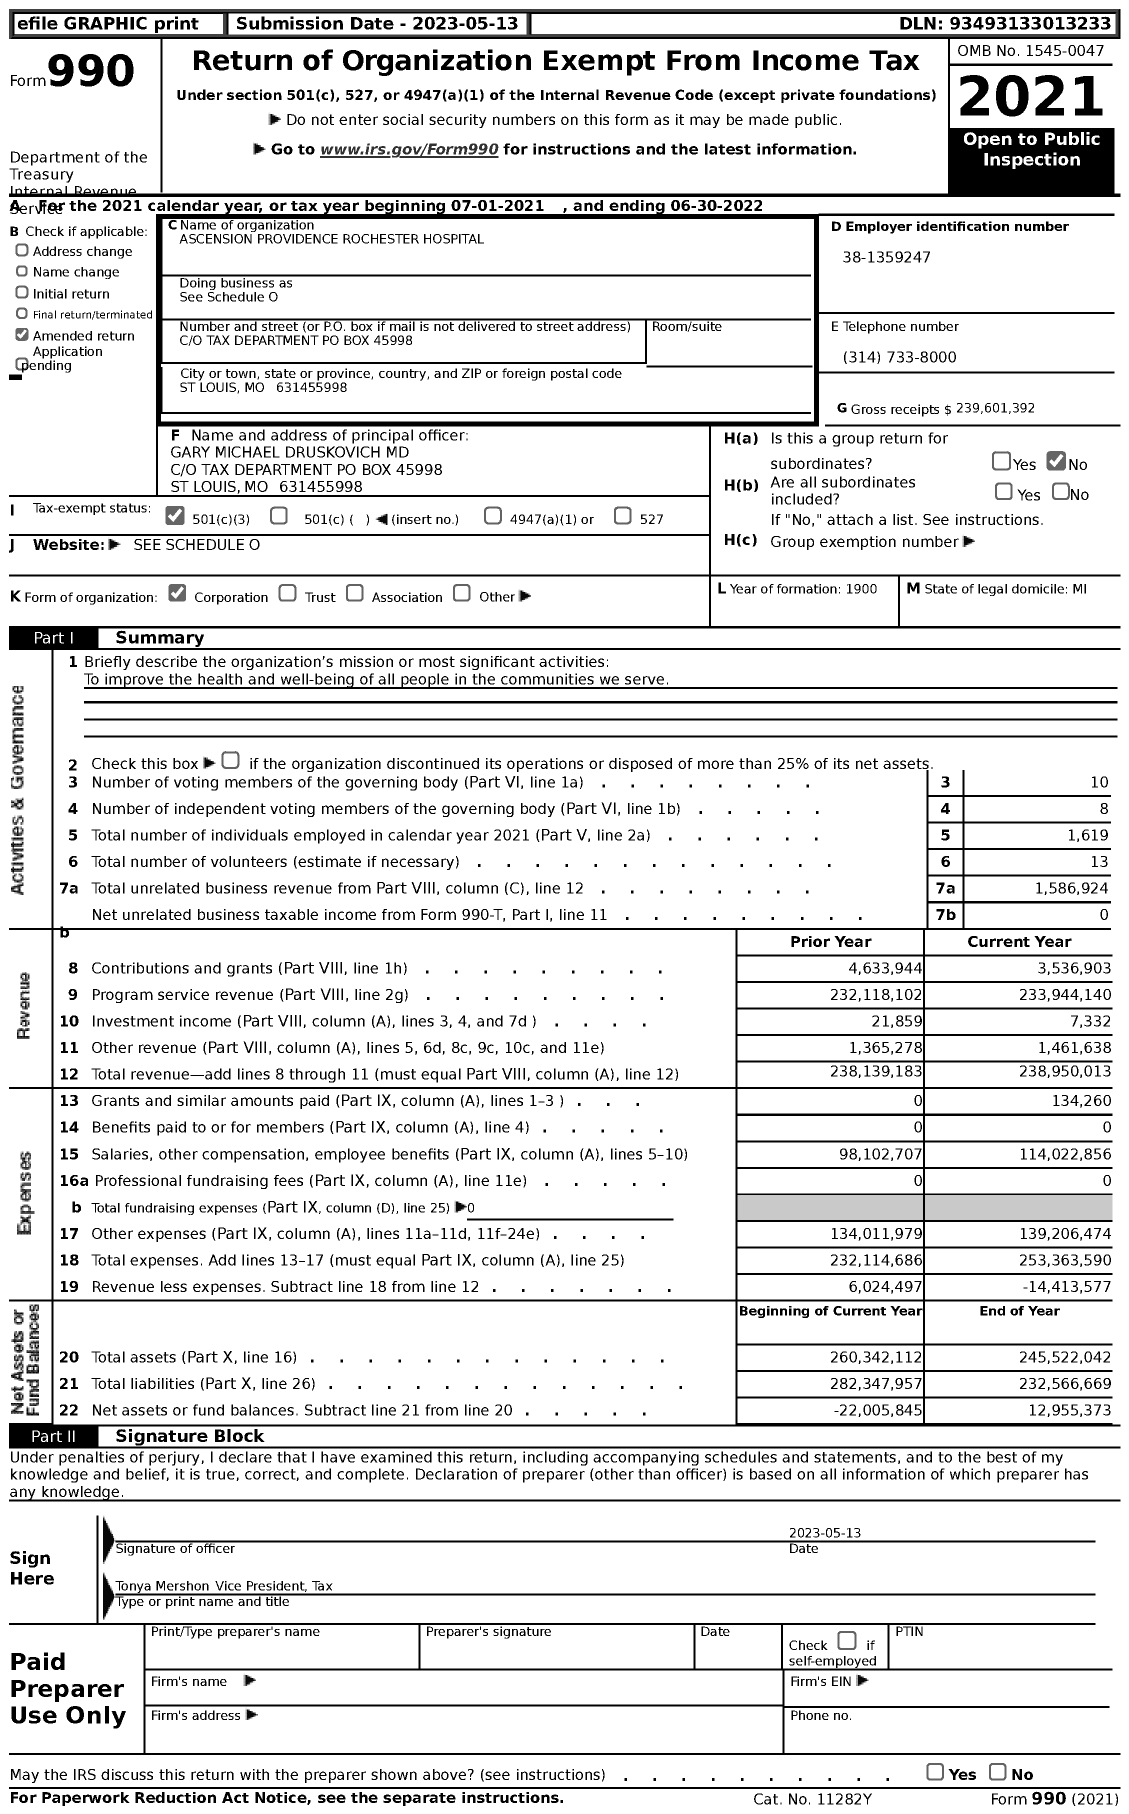 Image of first page of 2021 Form 990 for Ascension Providence Rochester Hospital